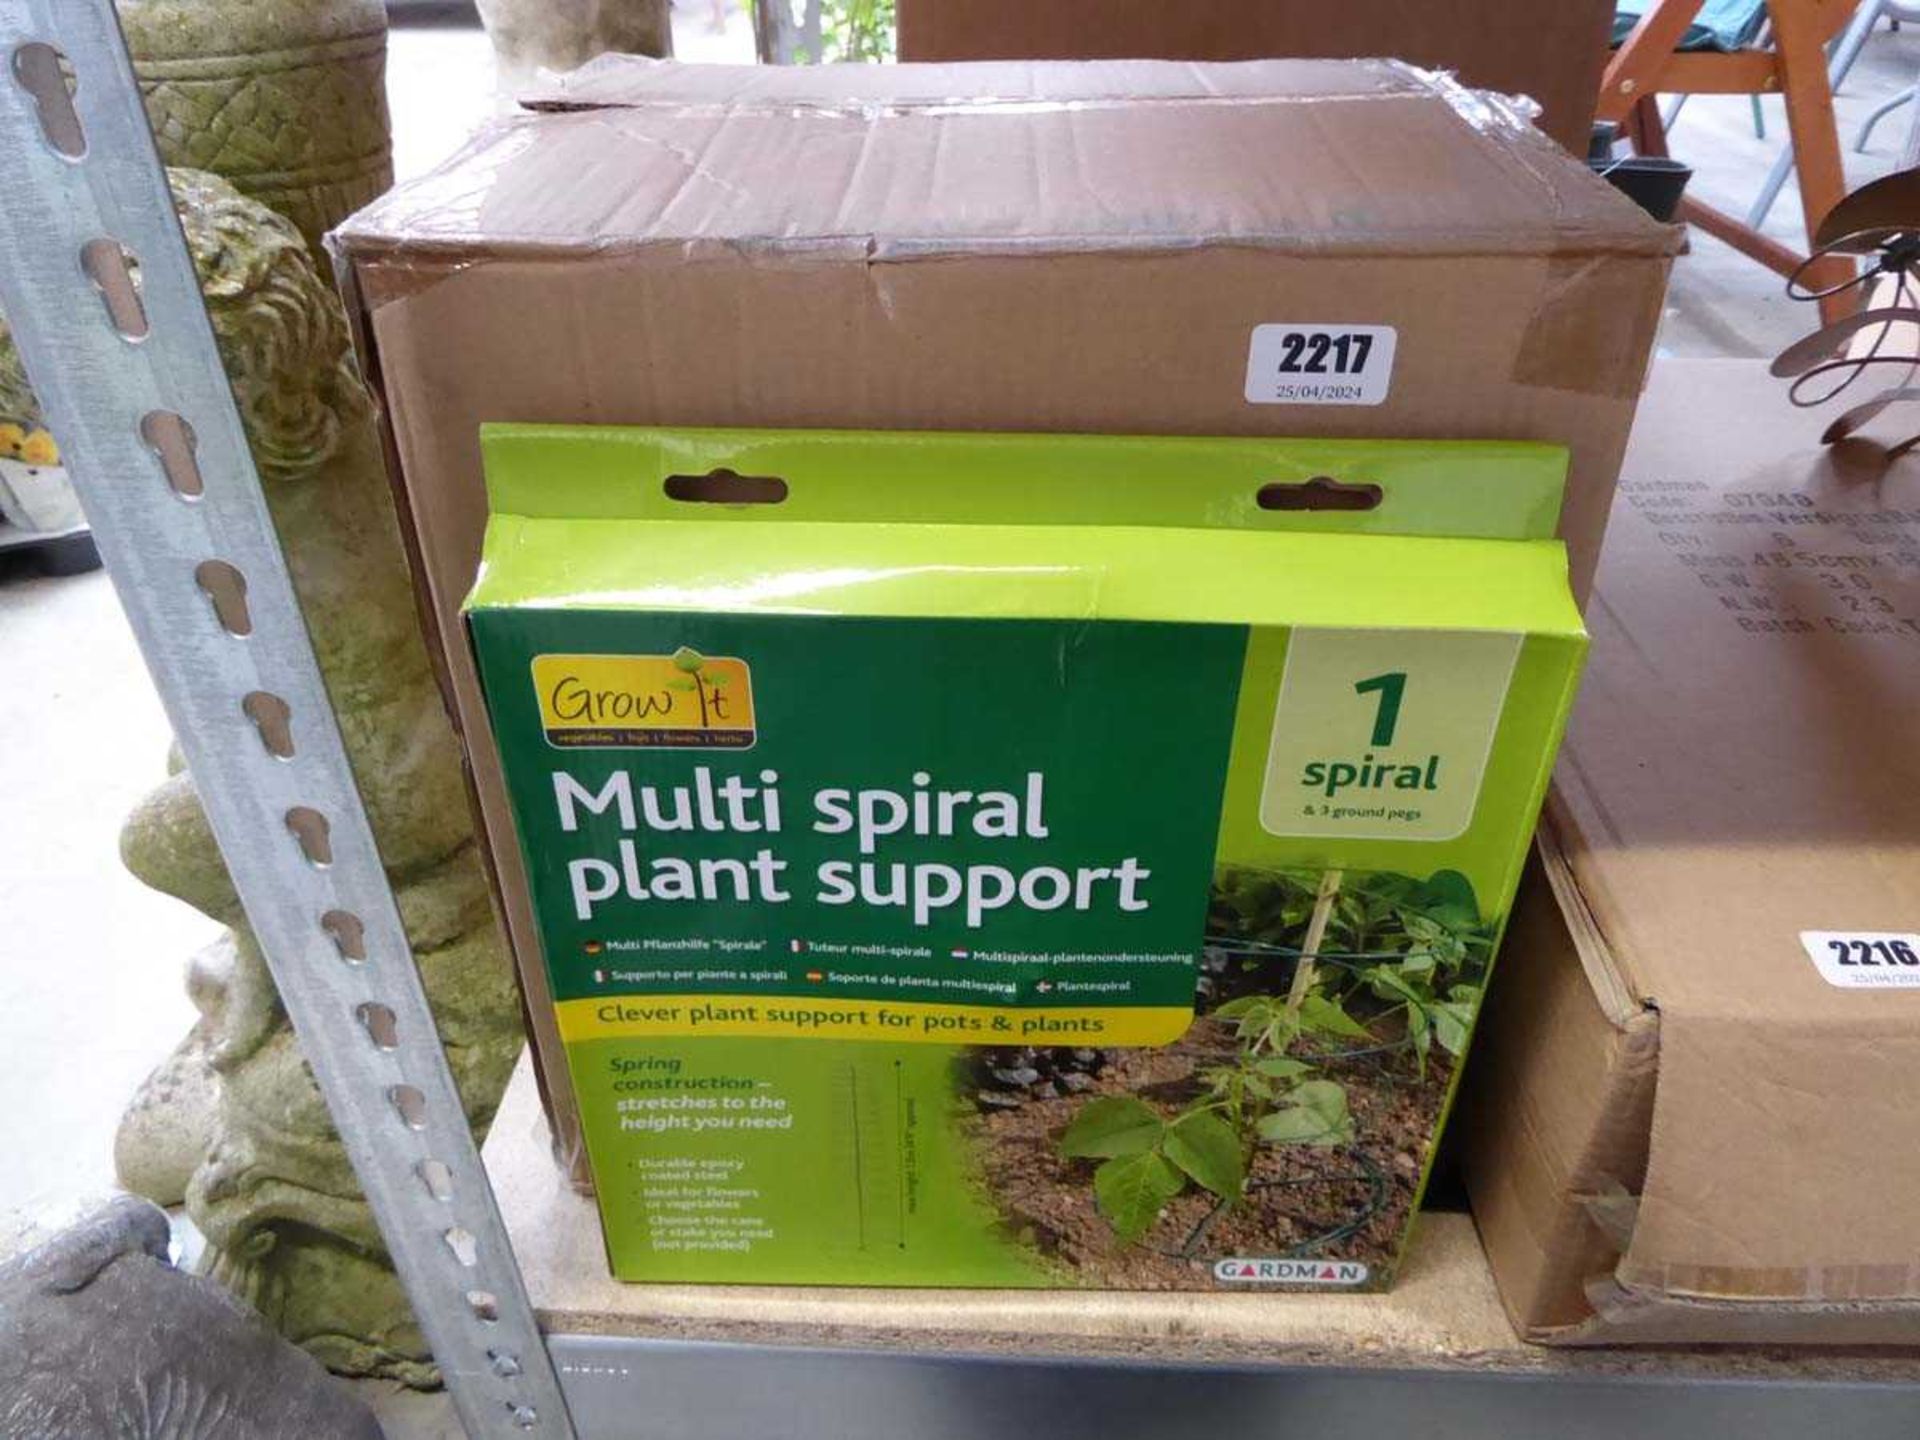 Box containing 12 multi spiral plant supports